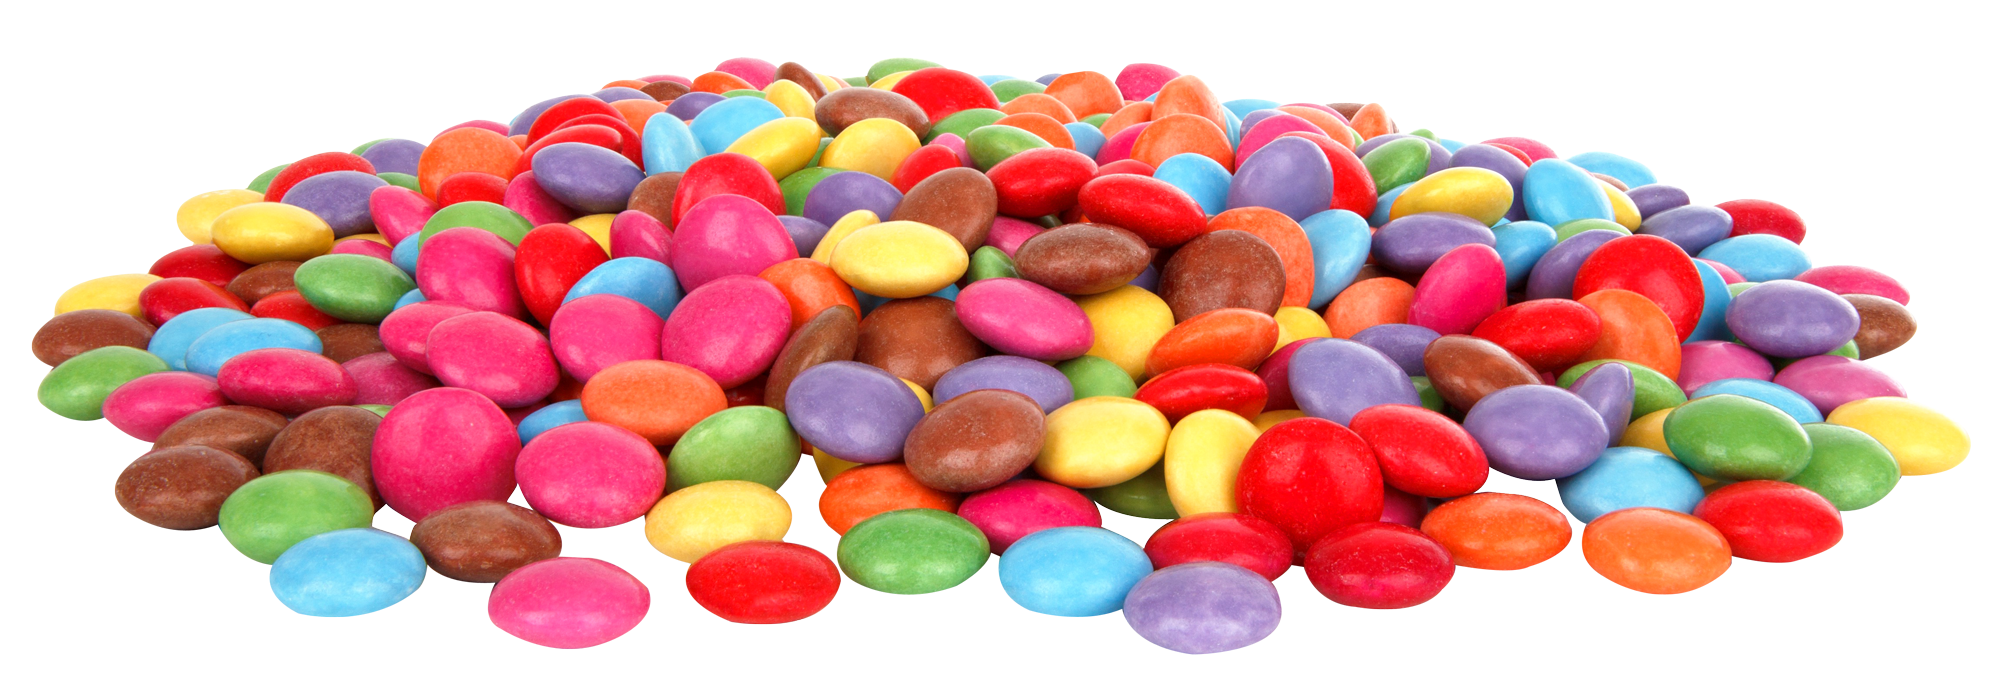 Candy PNG Free Download